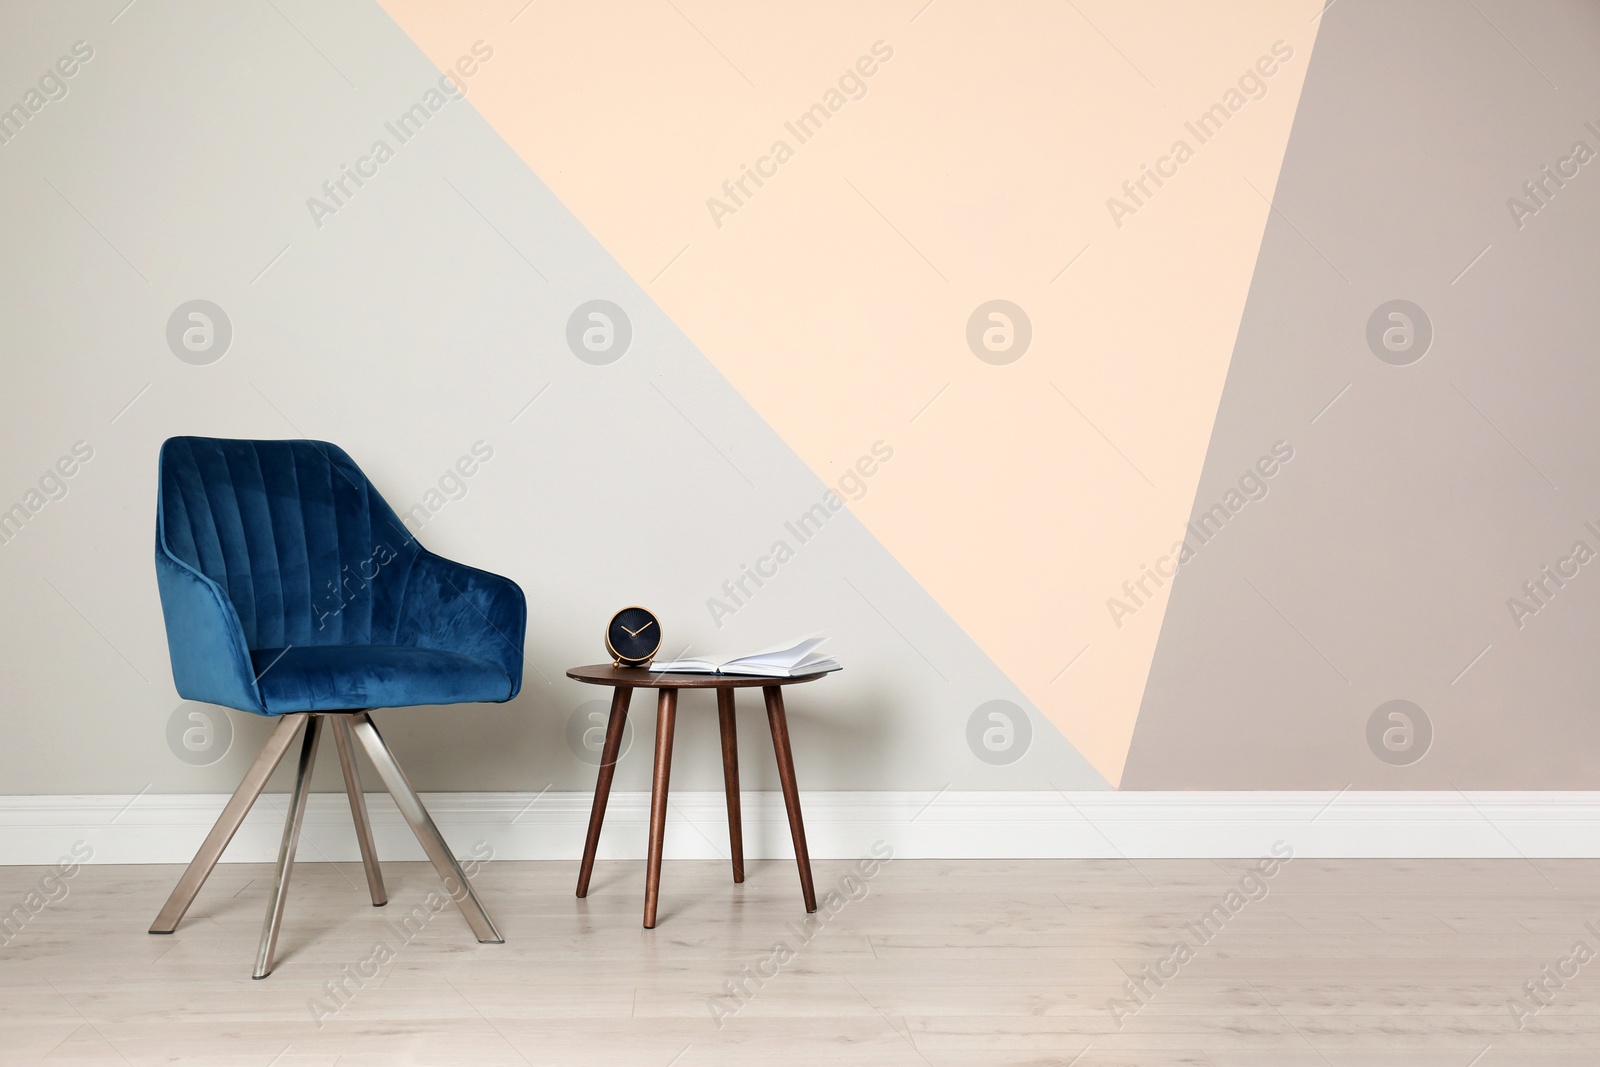 Photo of Modern blue chair and table for interior design on wooden floor at color wall